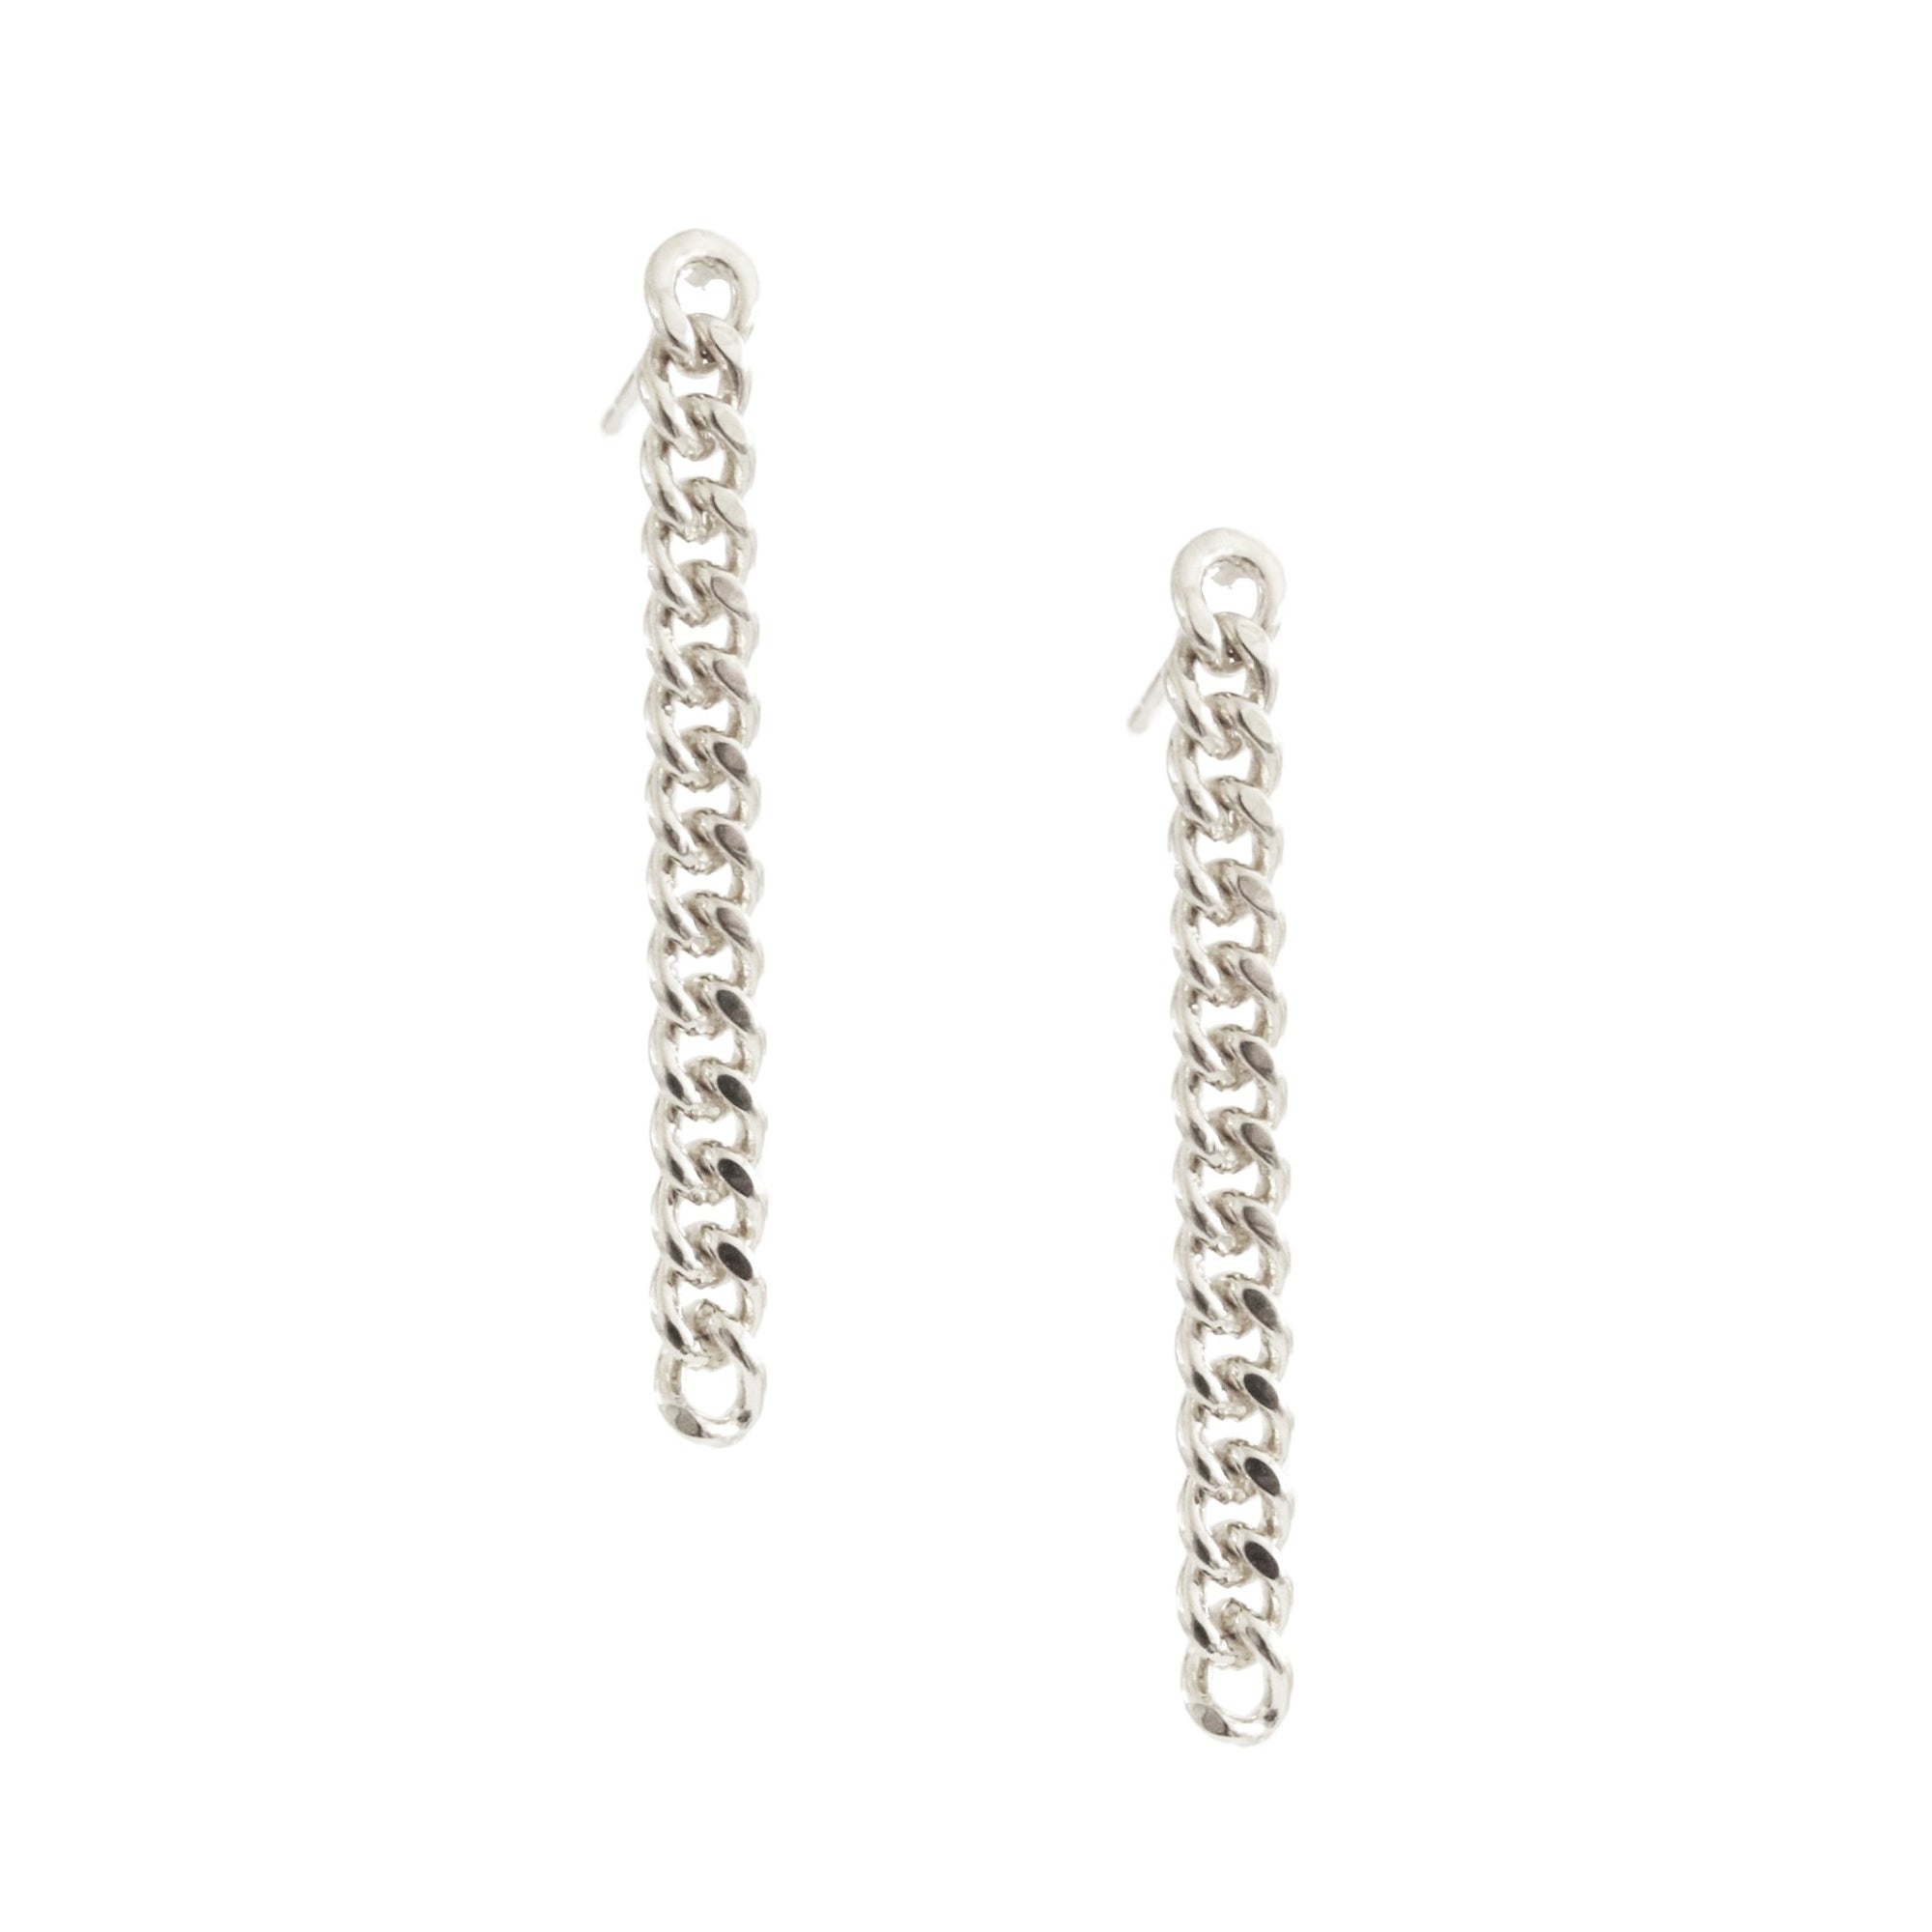 POISE CABLE LINK CHAIN DROP STUDS - SILVER - SO PRETTY CARA COTTER